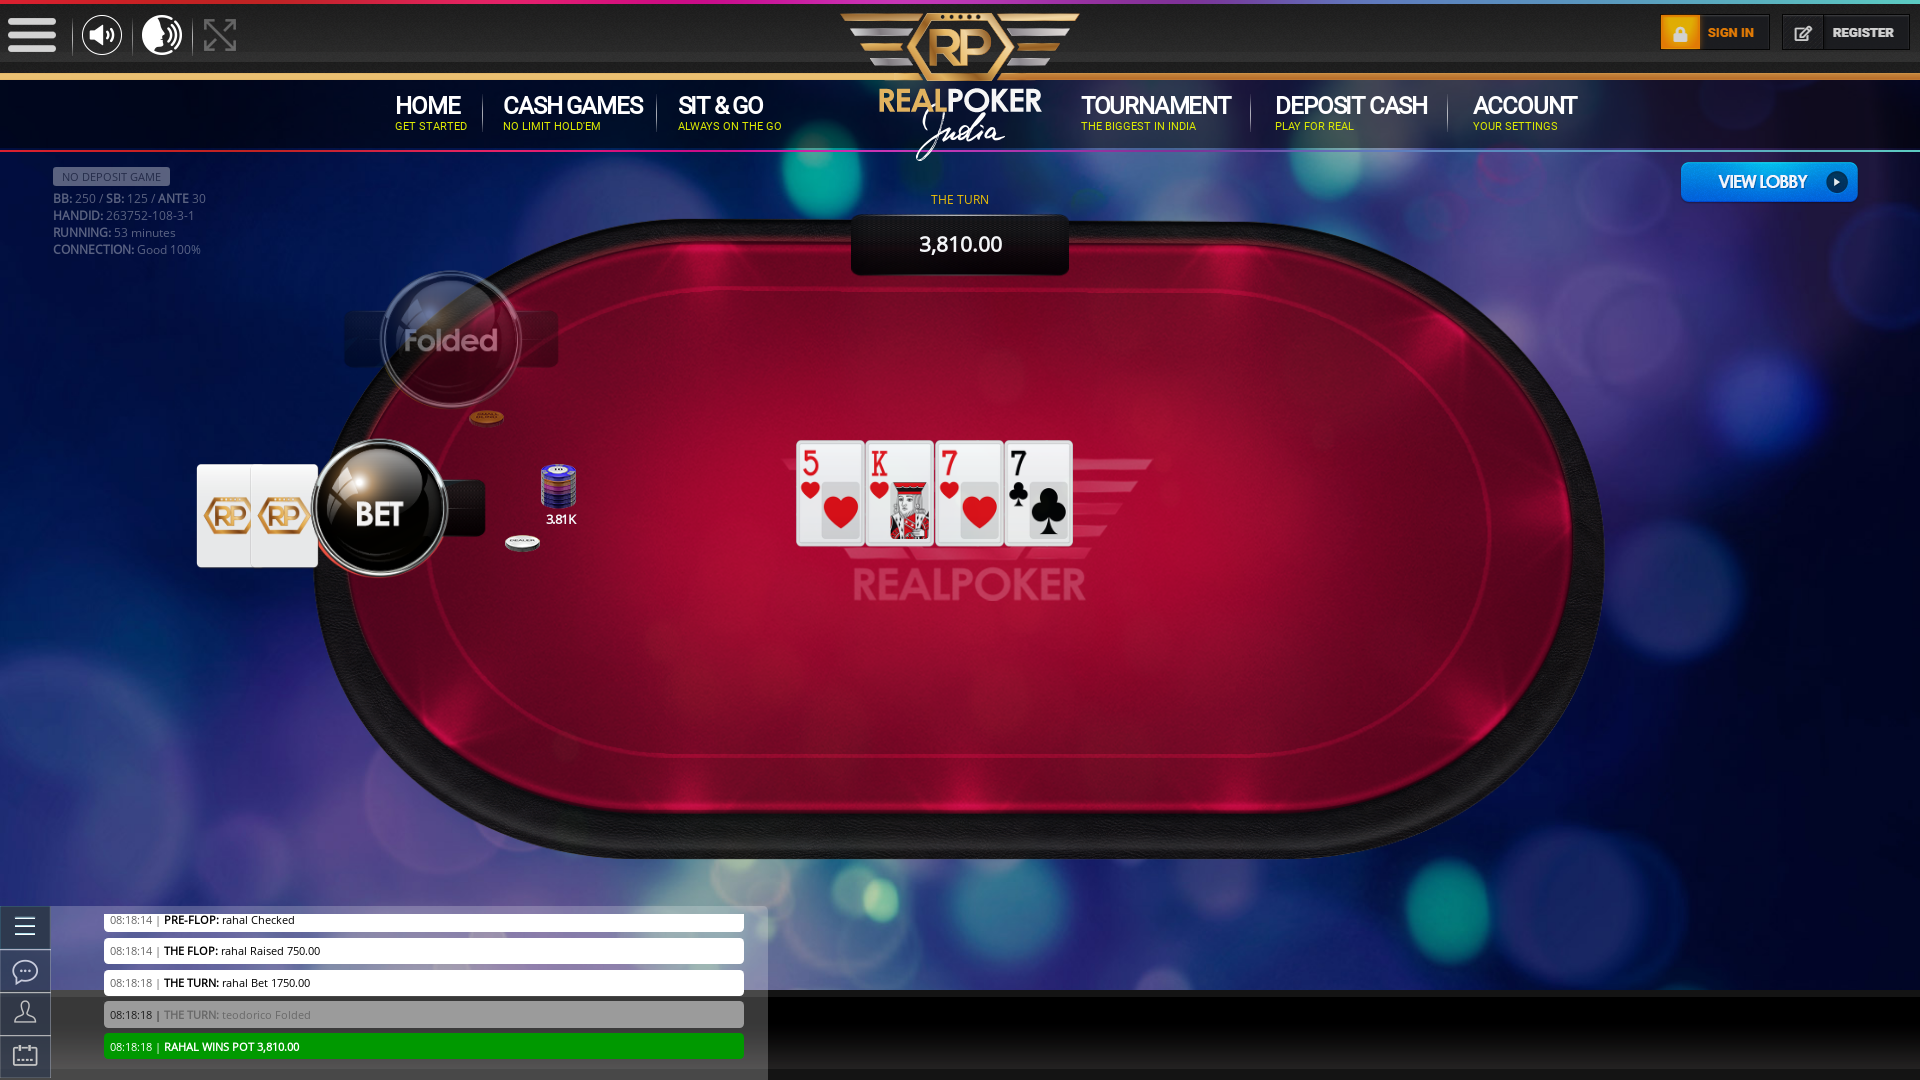 Real poker on a 10 player table in the 53rd minute of the game